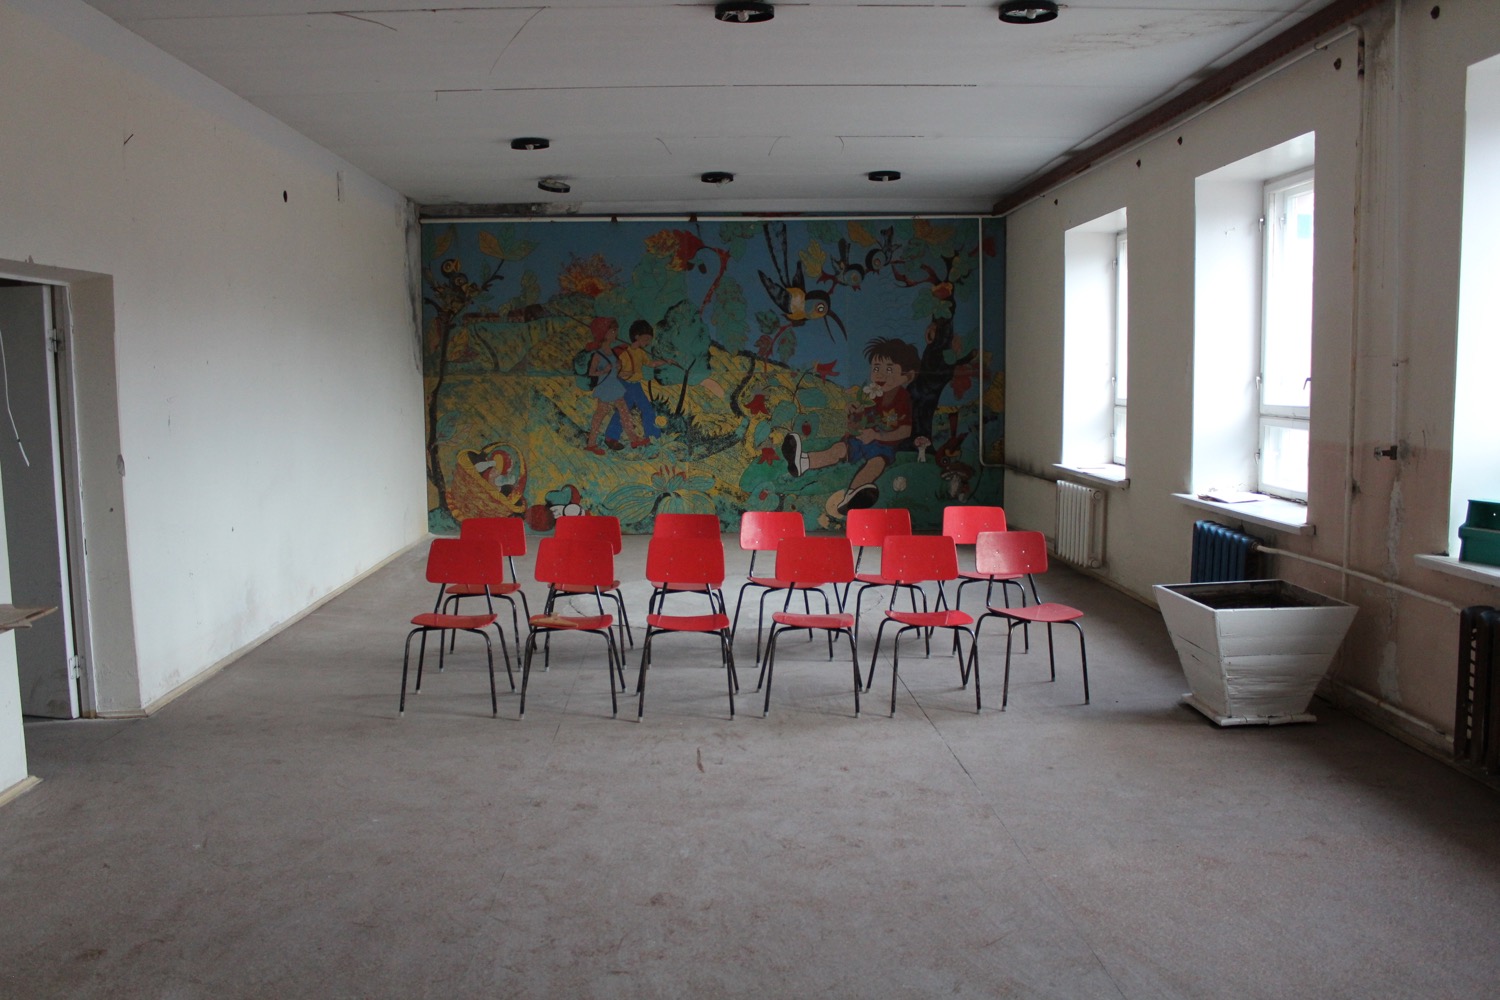 a room with red chairs and a mural on the wall